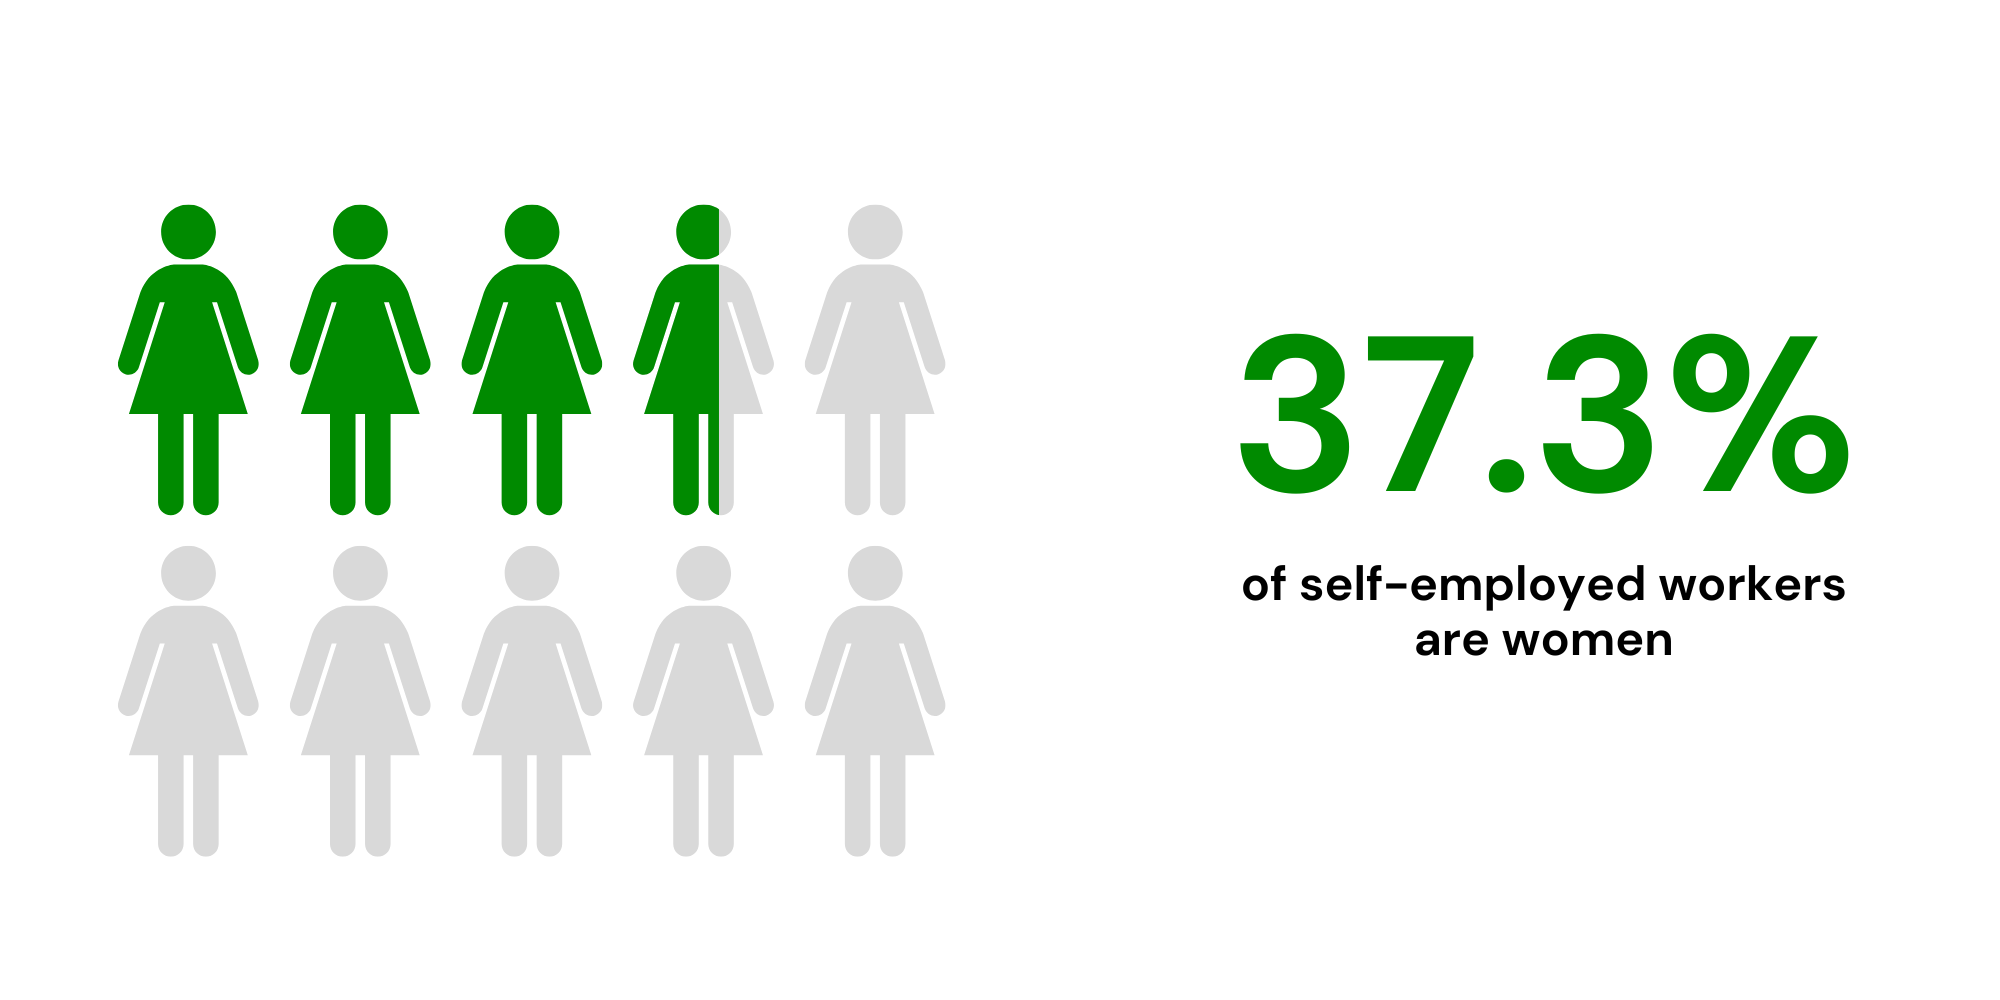 10 female icons in grey, 3.5 of the female icons are filled in green, 37.3% of self-employed workers are women